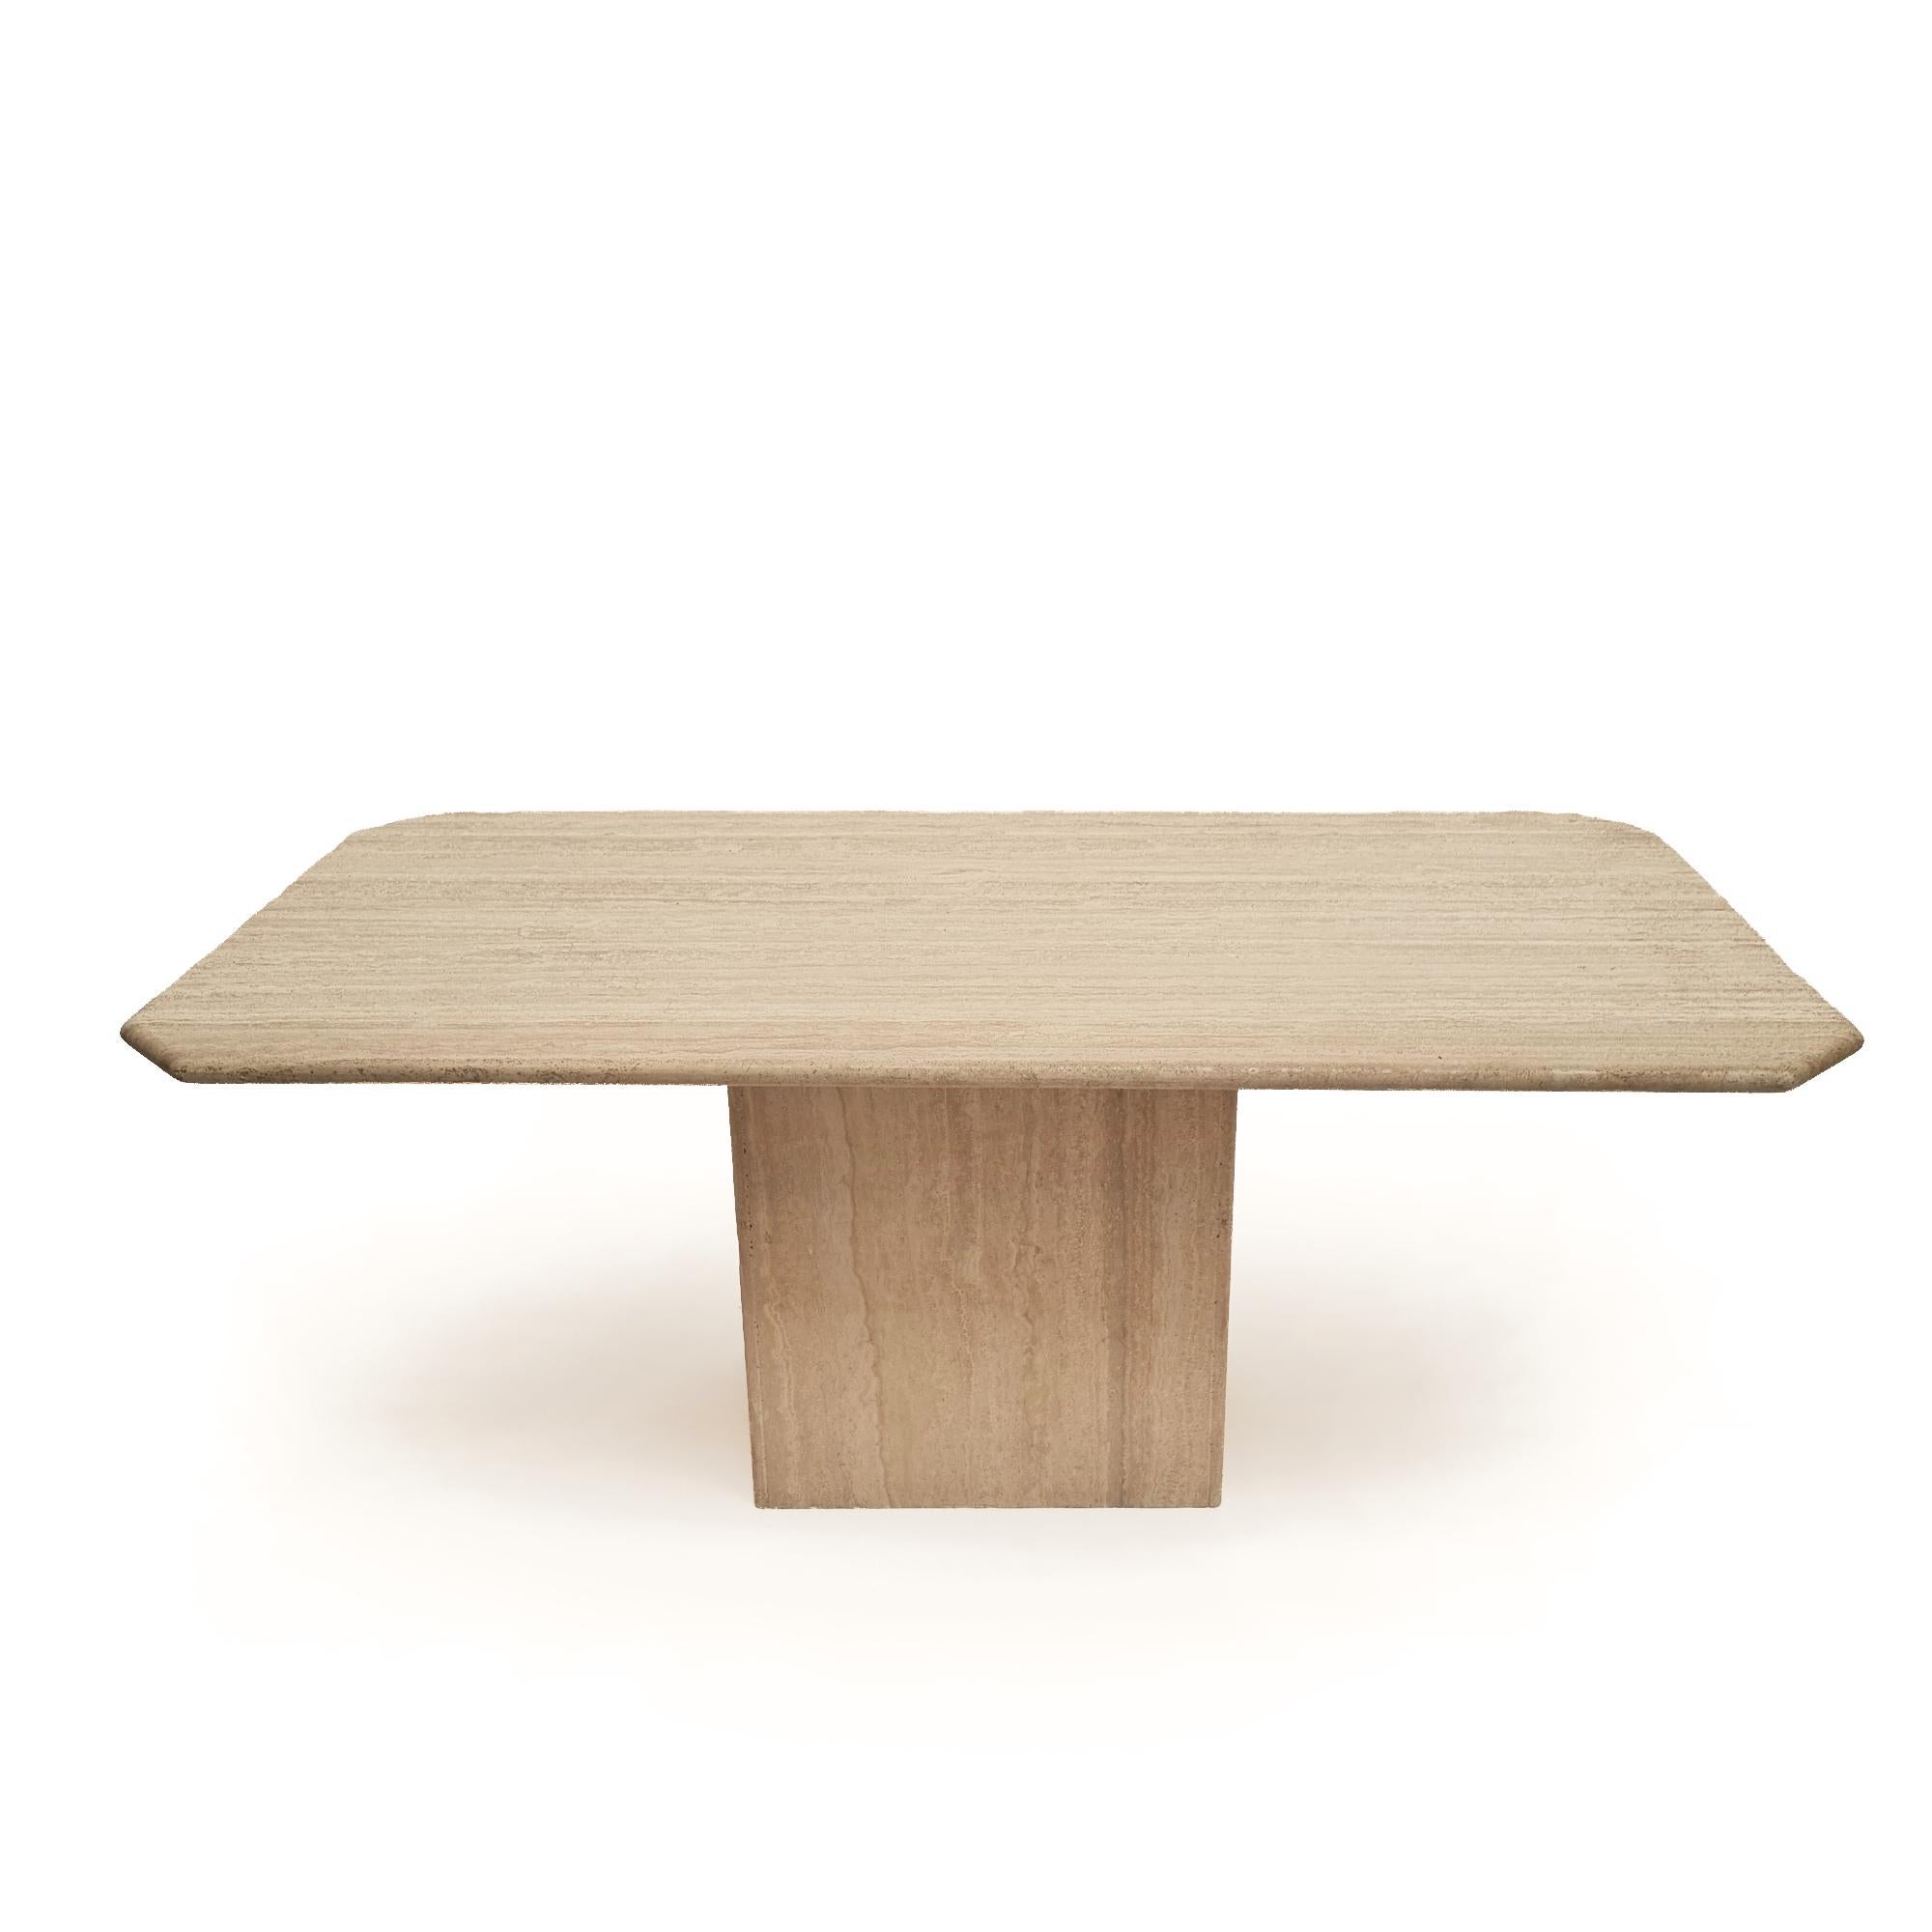 Presenting an exquisite Italian dining table from the 1970s, unbranded yet radiating timeless elegance. Its distinctive curvy edges rest upon a rectangular travertine column base, showcasing the beauty of natural stone.

This versatile piece